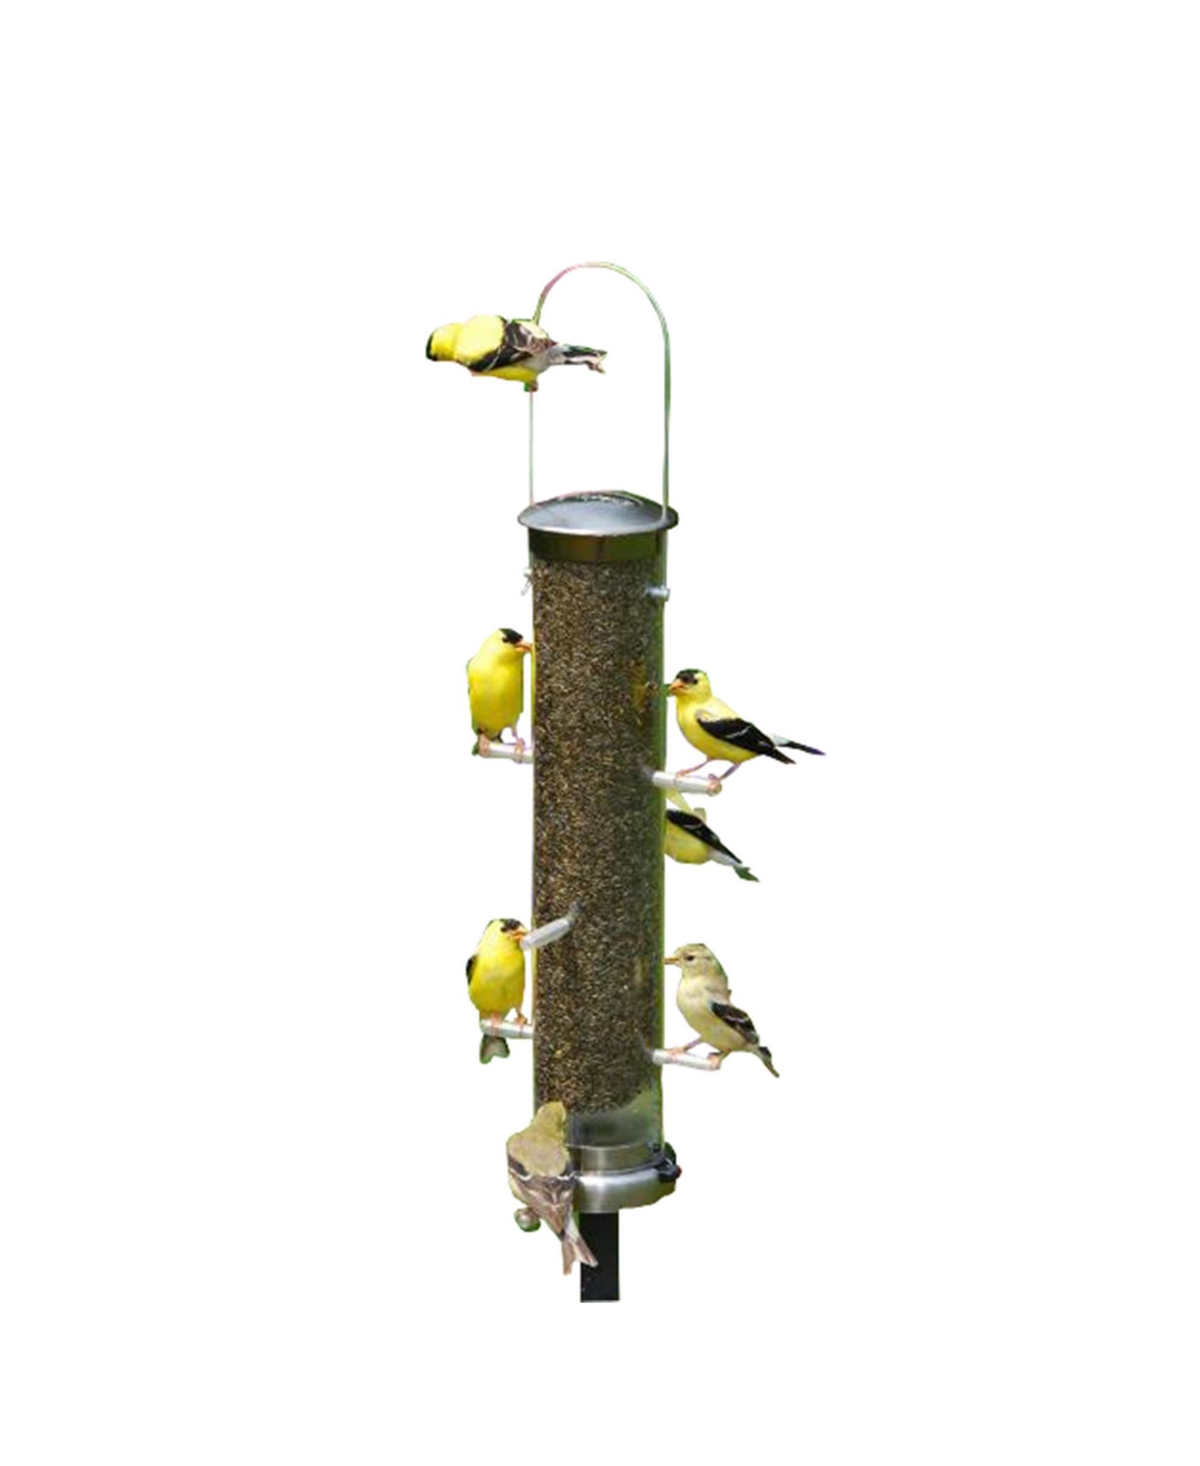 ASP400 Quick Clean Nyjer Tube Bird Feeder Brushed Nickle - Multi